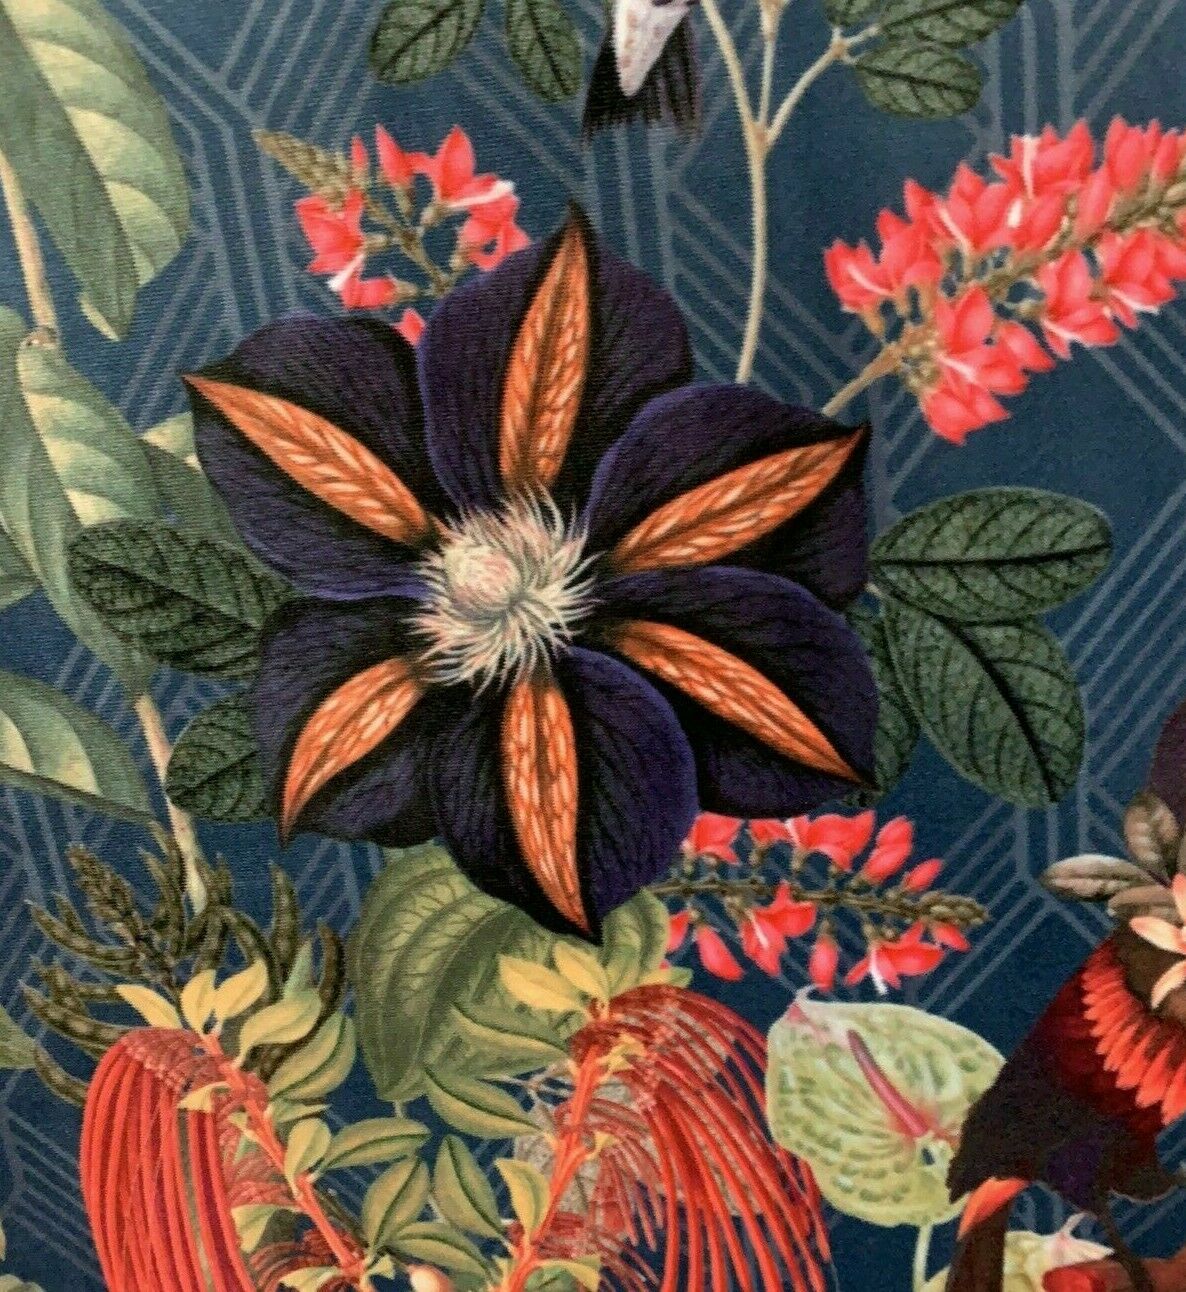 Toucan Colibri Jungle Fabric By The Meters Blue Sewing Material Art Deco Botanical Velvet Textile